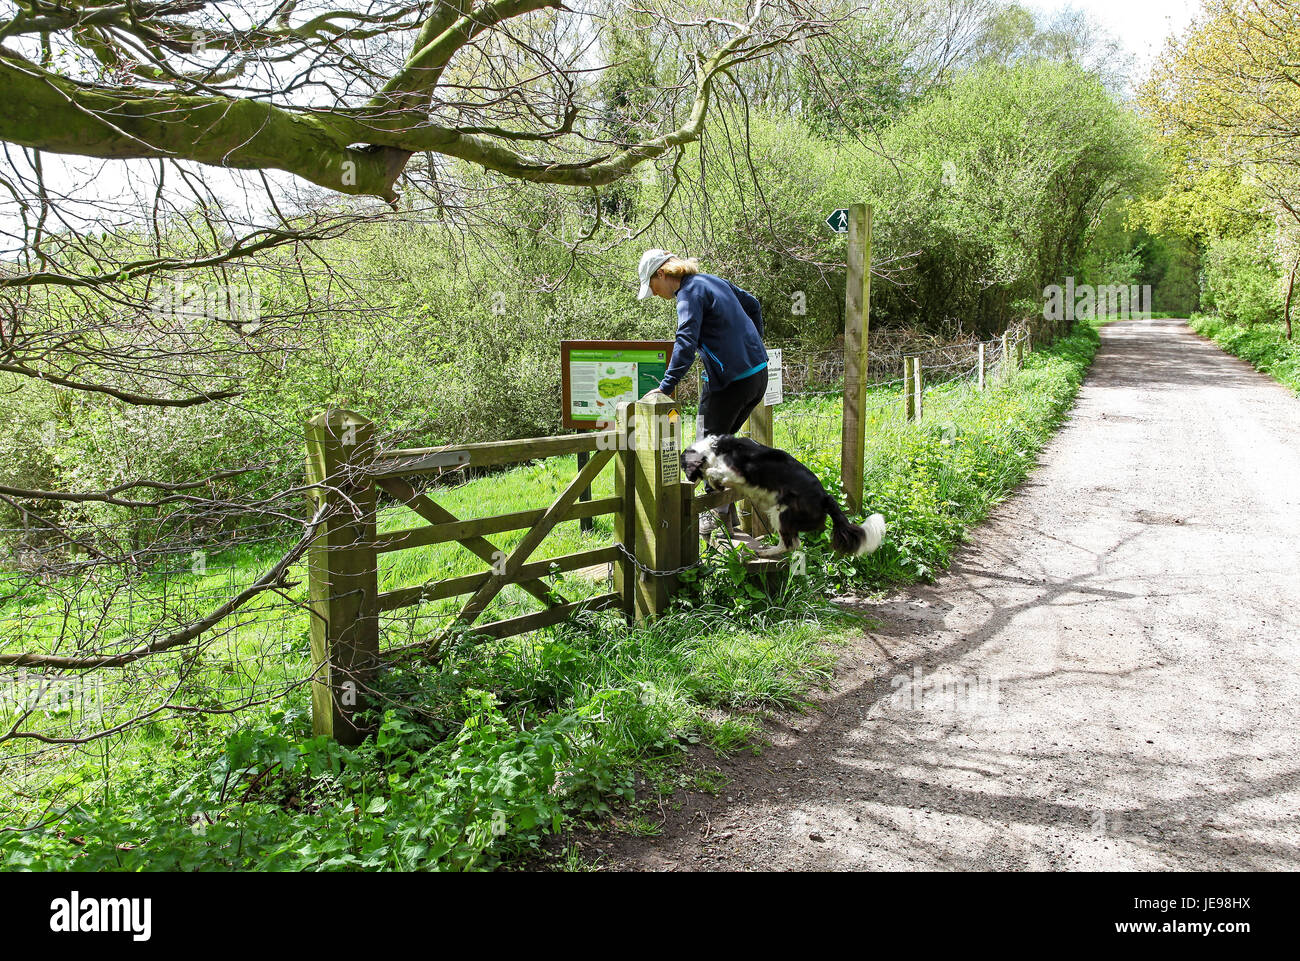 A woman and her dog climbing a stile at Swettenham Meadows nature reserve run by Cheshire Wildlife Trust, Swettenham Cheshire England UK Stock Photo